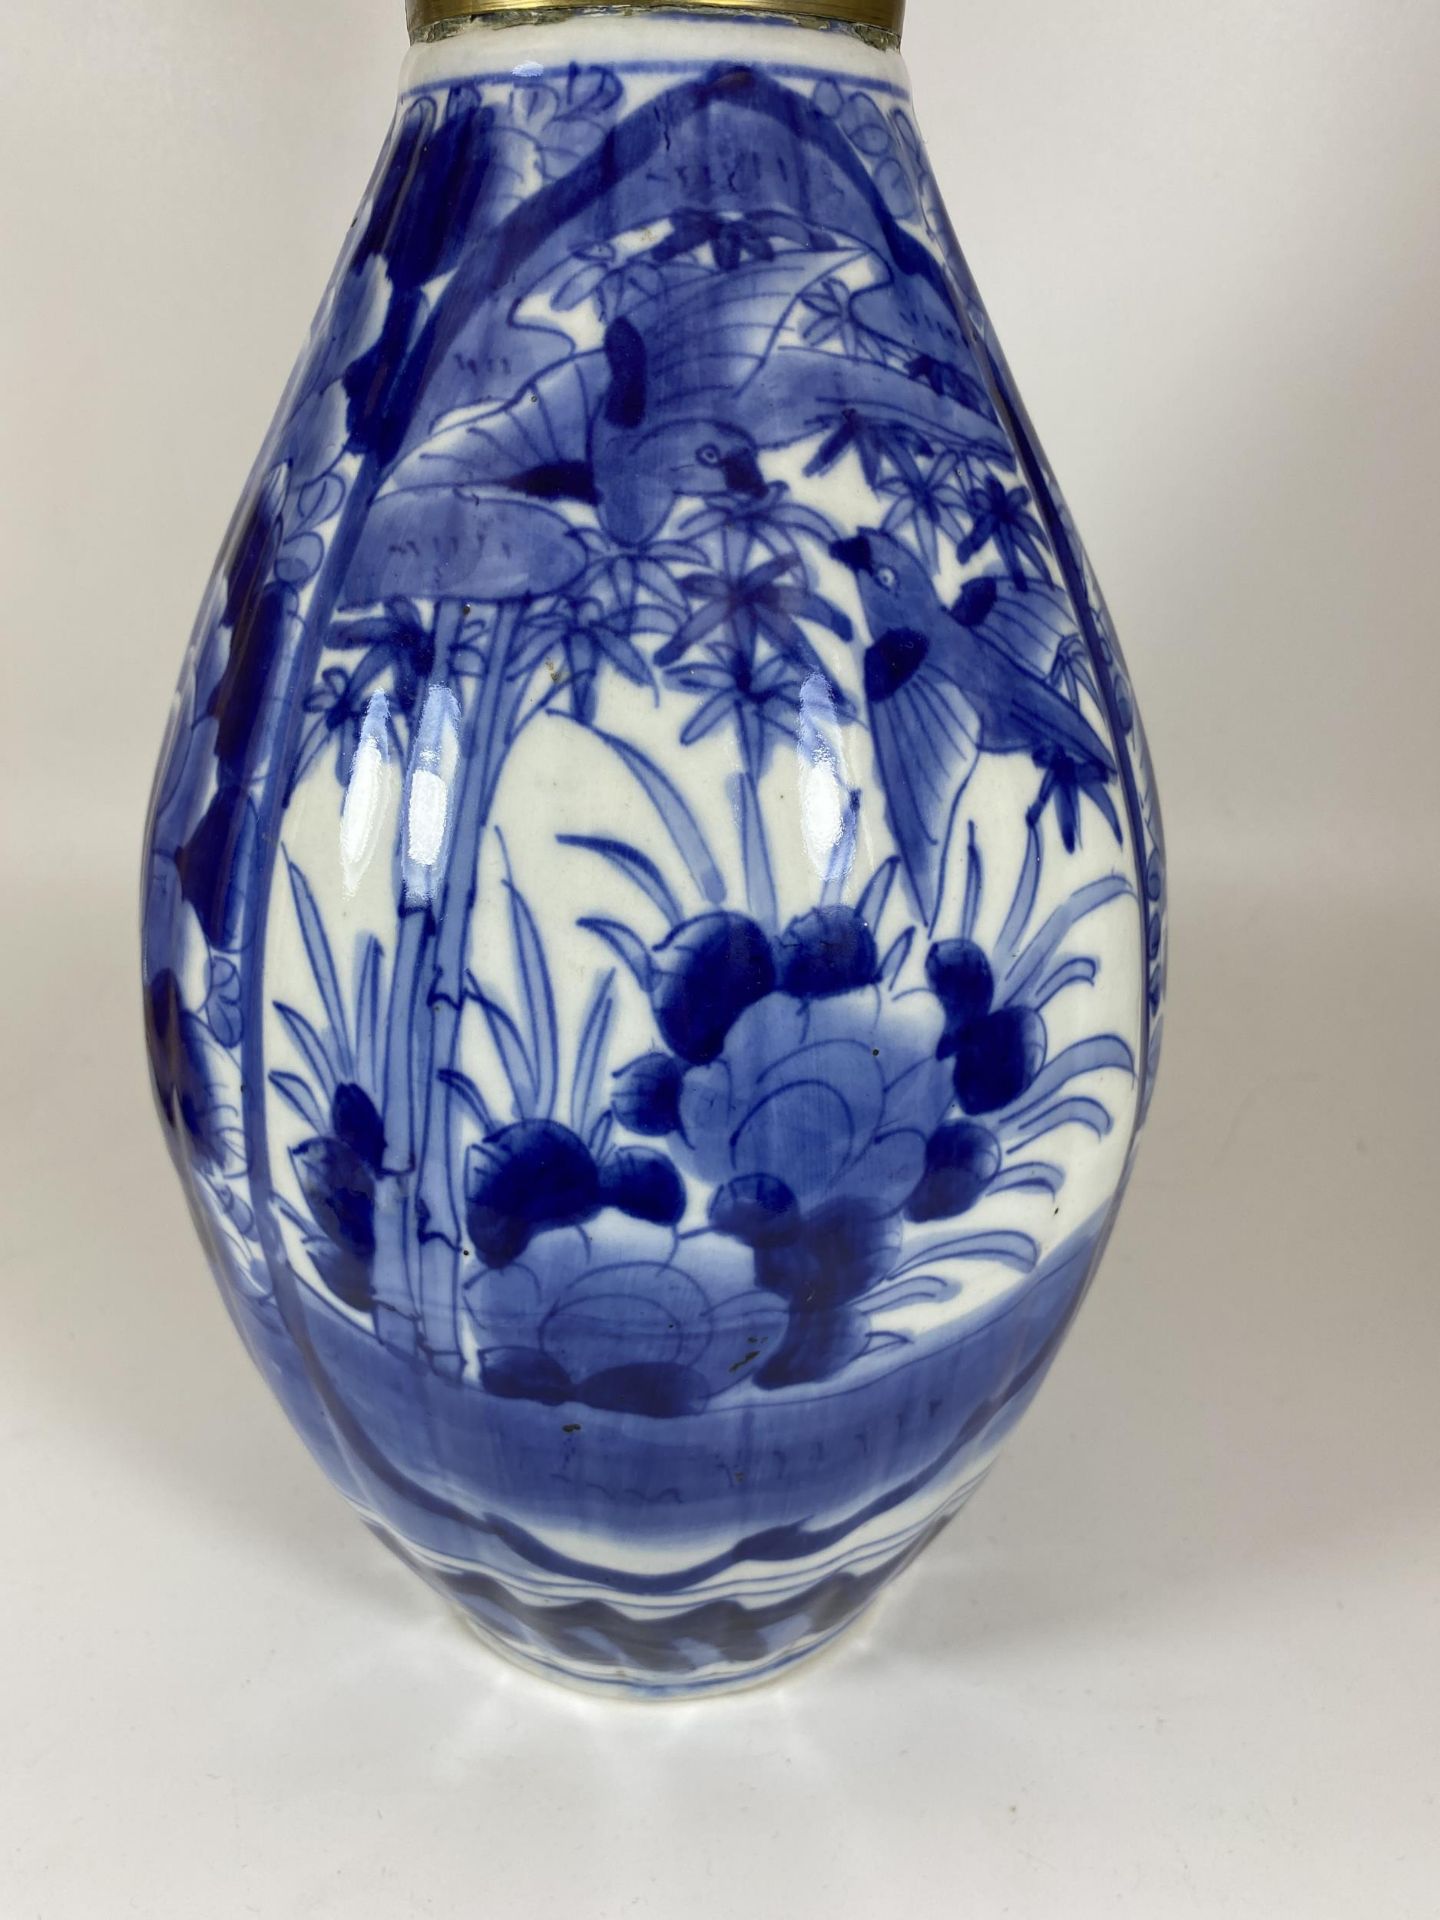 A LARGE JAPANESE MEIJI PERIOD (1868-1912) BLUE AND WHITE FLORAL DESIGN VASE WITH CONVERTED TRENCH - Image 2 of 6